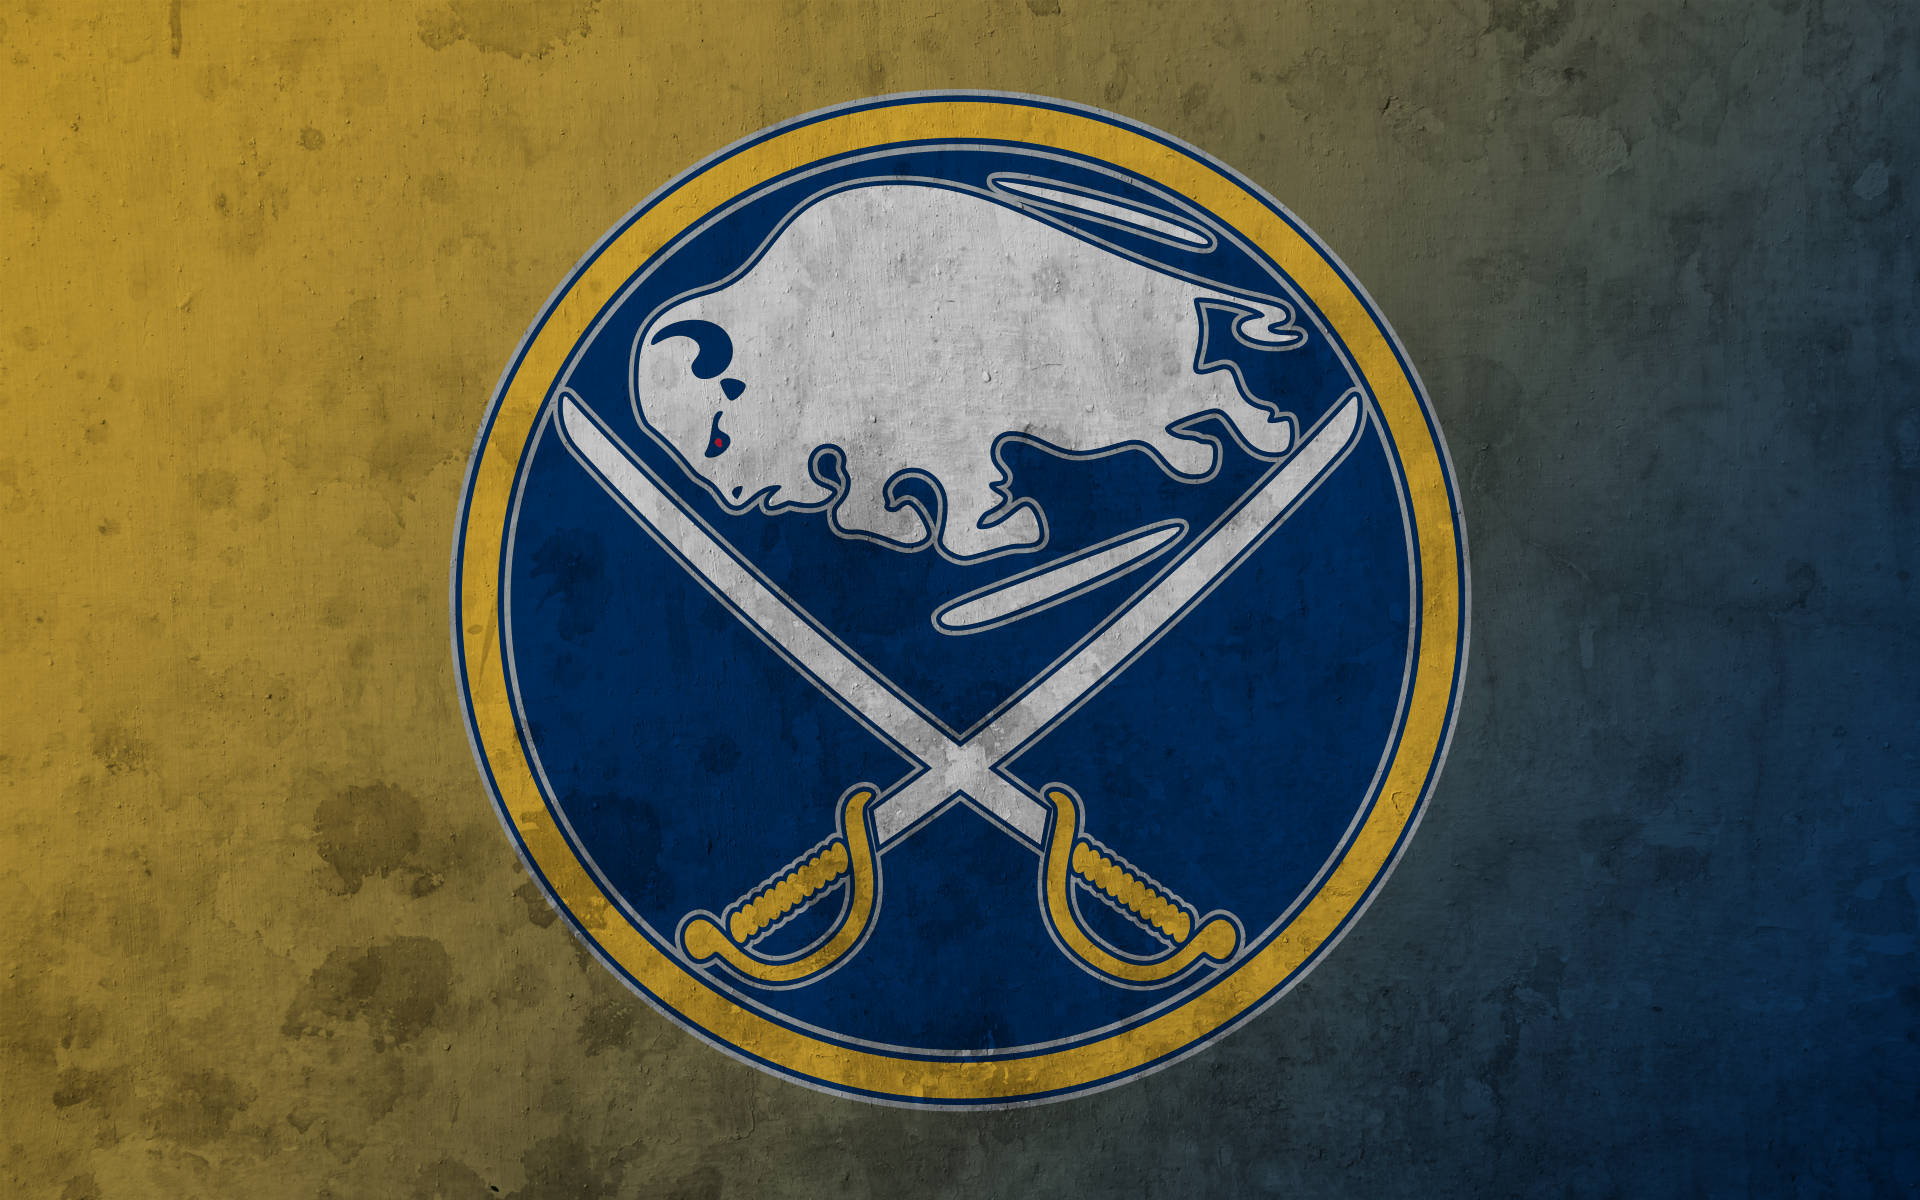 Buffalo Sabres Displaying Strength and Spirit in Rugged Blue and Yellow Wallpaper